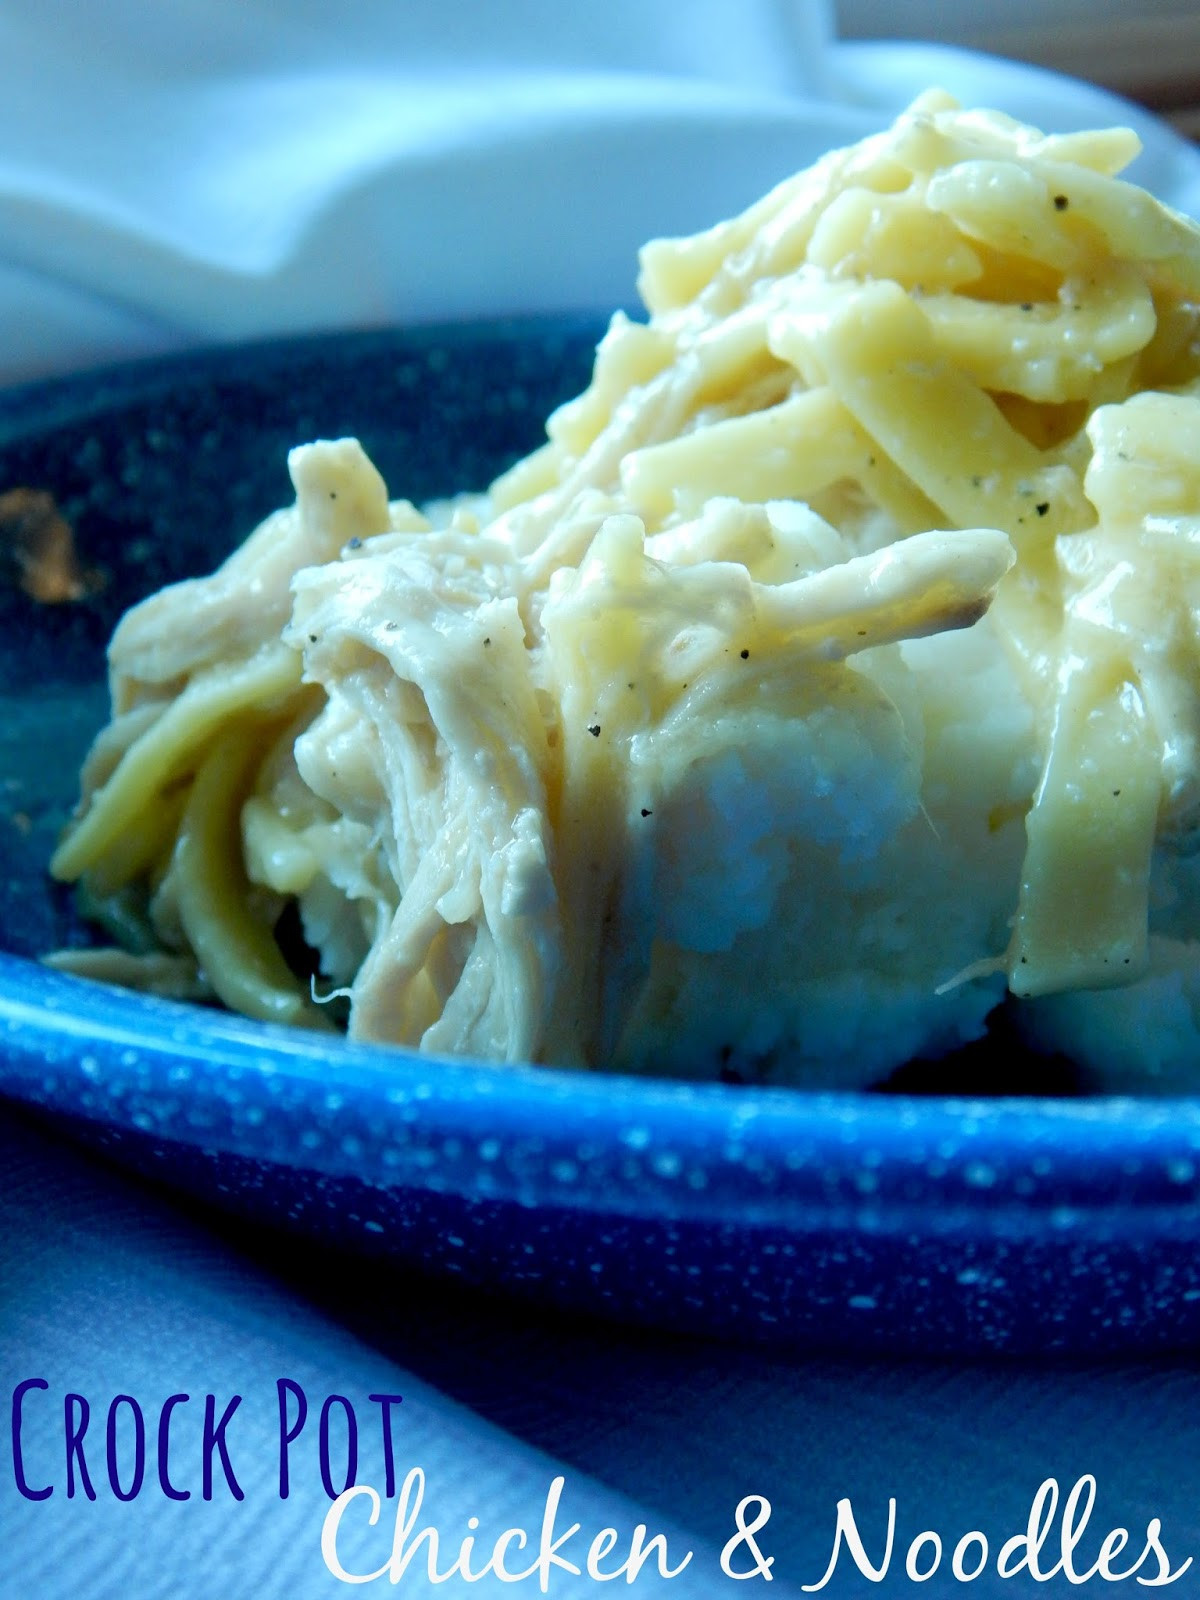 Chicken And Noodles Crock Pot
 Ally s Sweet and Savory Eats Crock Pot Chicken & Noodles